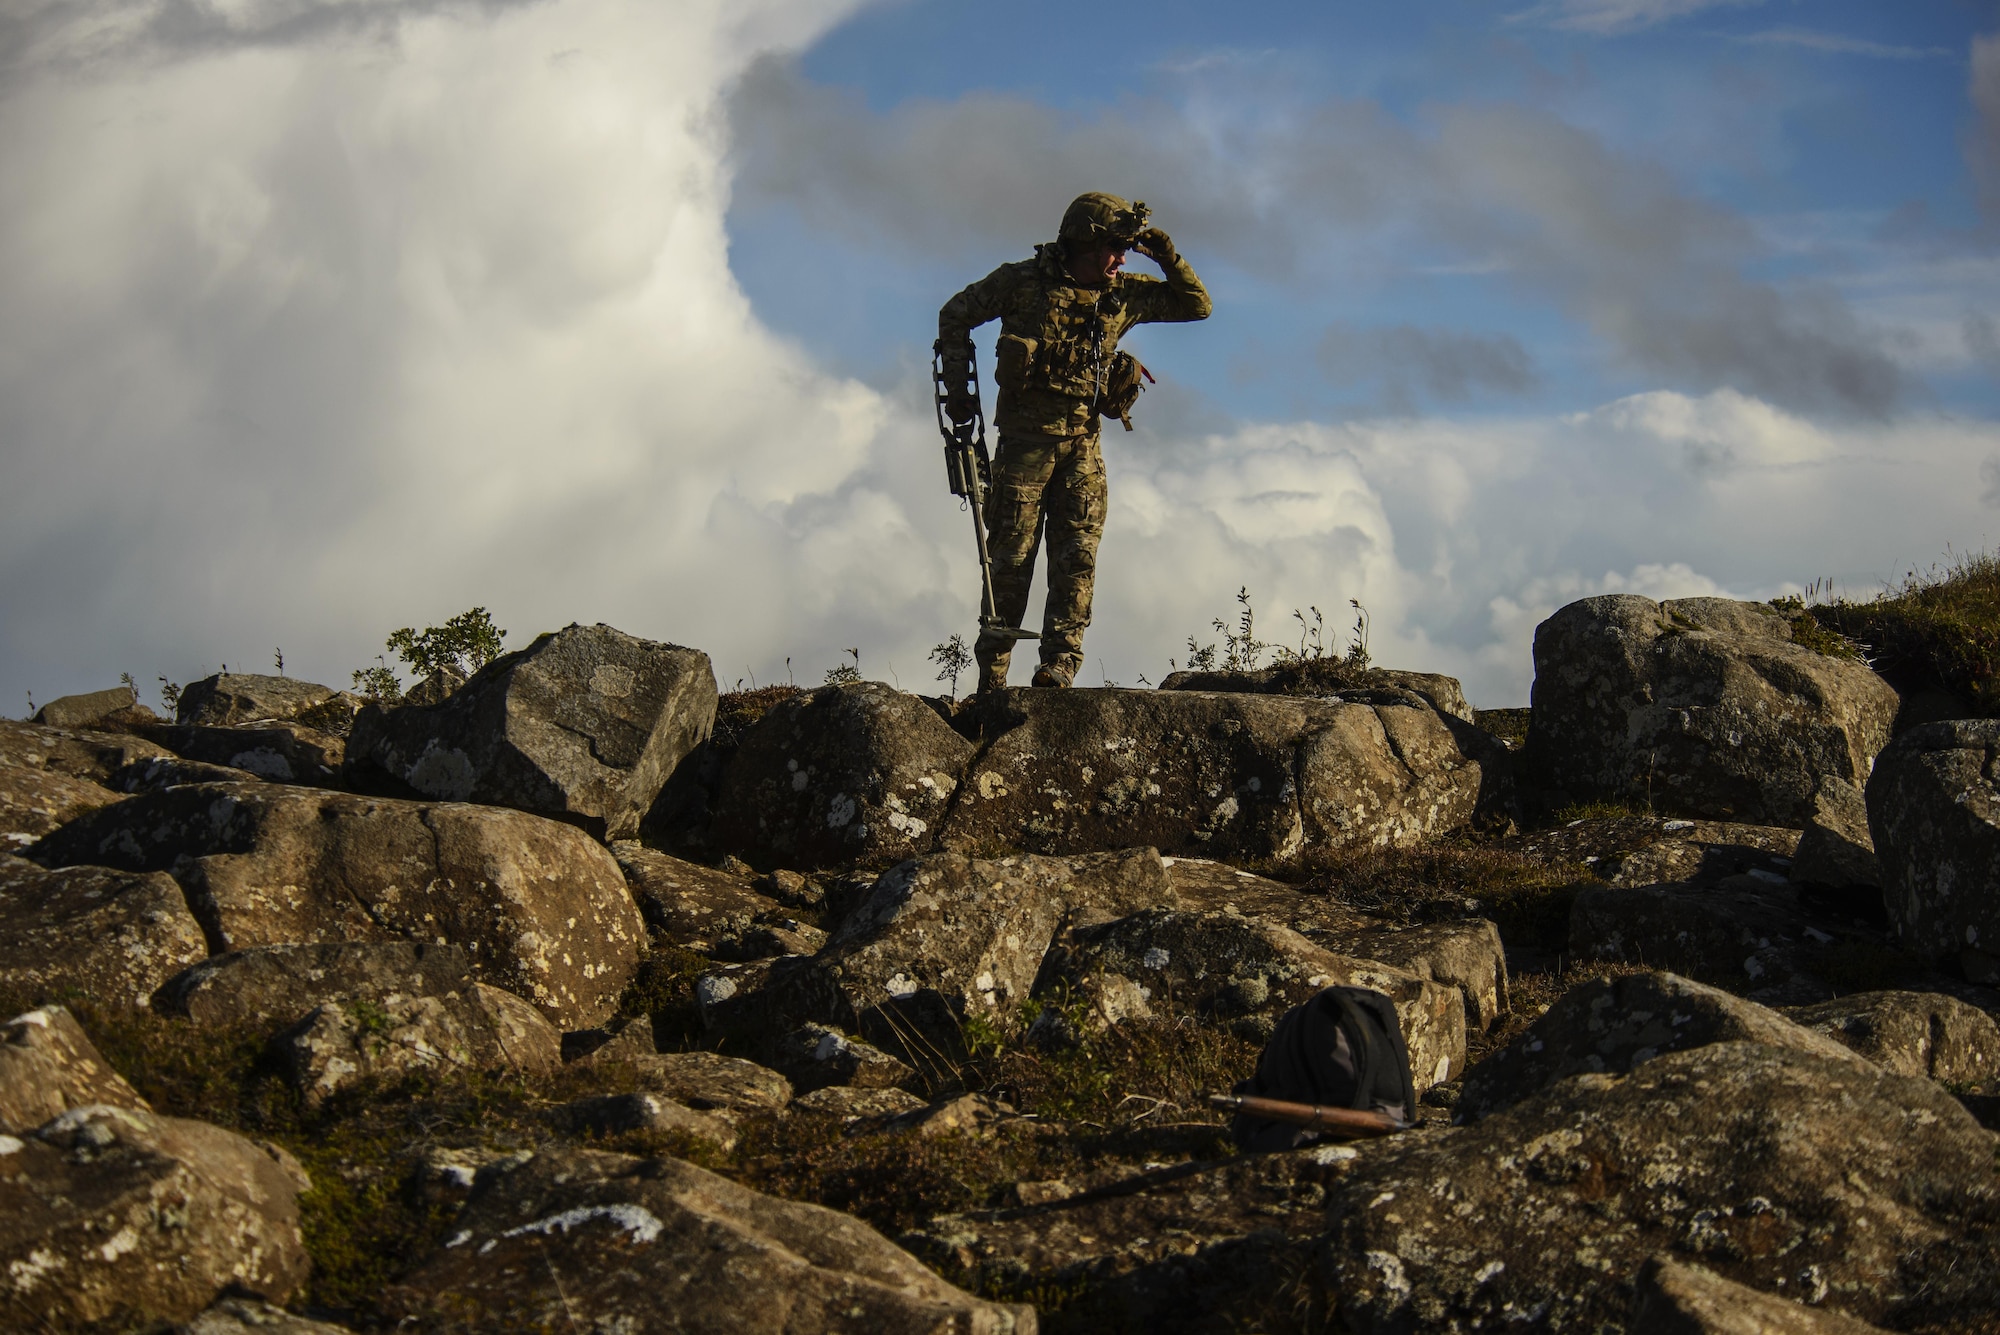 U.S. Air Force Staff Sgt. Cole Carroll, 52nd Civil Engineer Squadron explosive ordnance disposal craftsman, Spangdahlem Air Base, Germany, scans the area for additional threats after locating an improvised explosive device during Northern Challenge 16 exercise at Icelandic Coast Guard Keflavik Facility, Iceland, Sept. 19, 2016. The 52nd EOD, provides an operational explosive ordnance disposal capability to locate, identify, render safe, recover, field evaluate and dispose of all explosive ordnance. (U.S. Air Force photo by Staff Sgt. Jonathan Snyder)